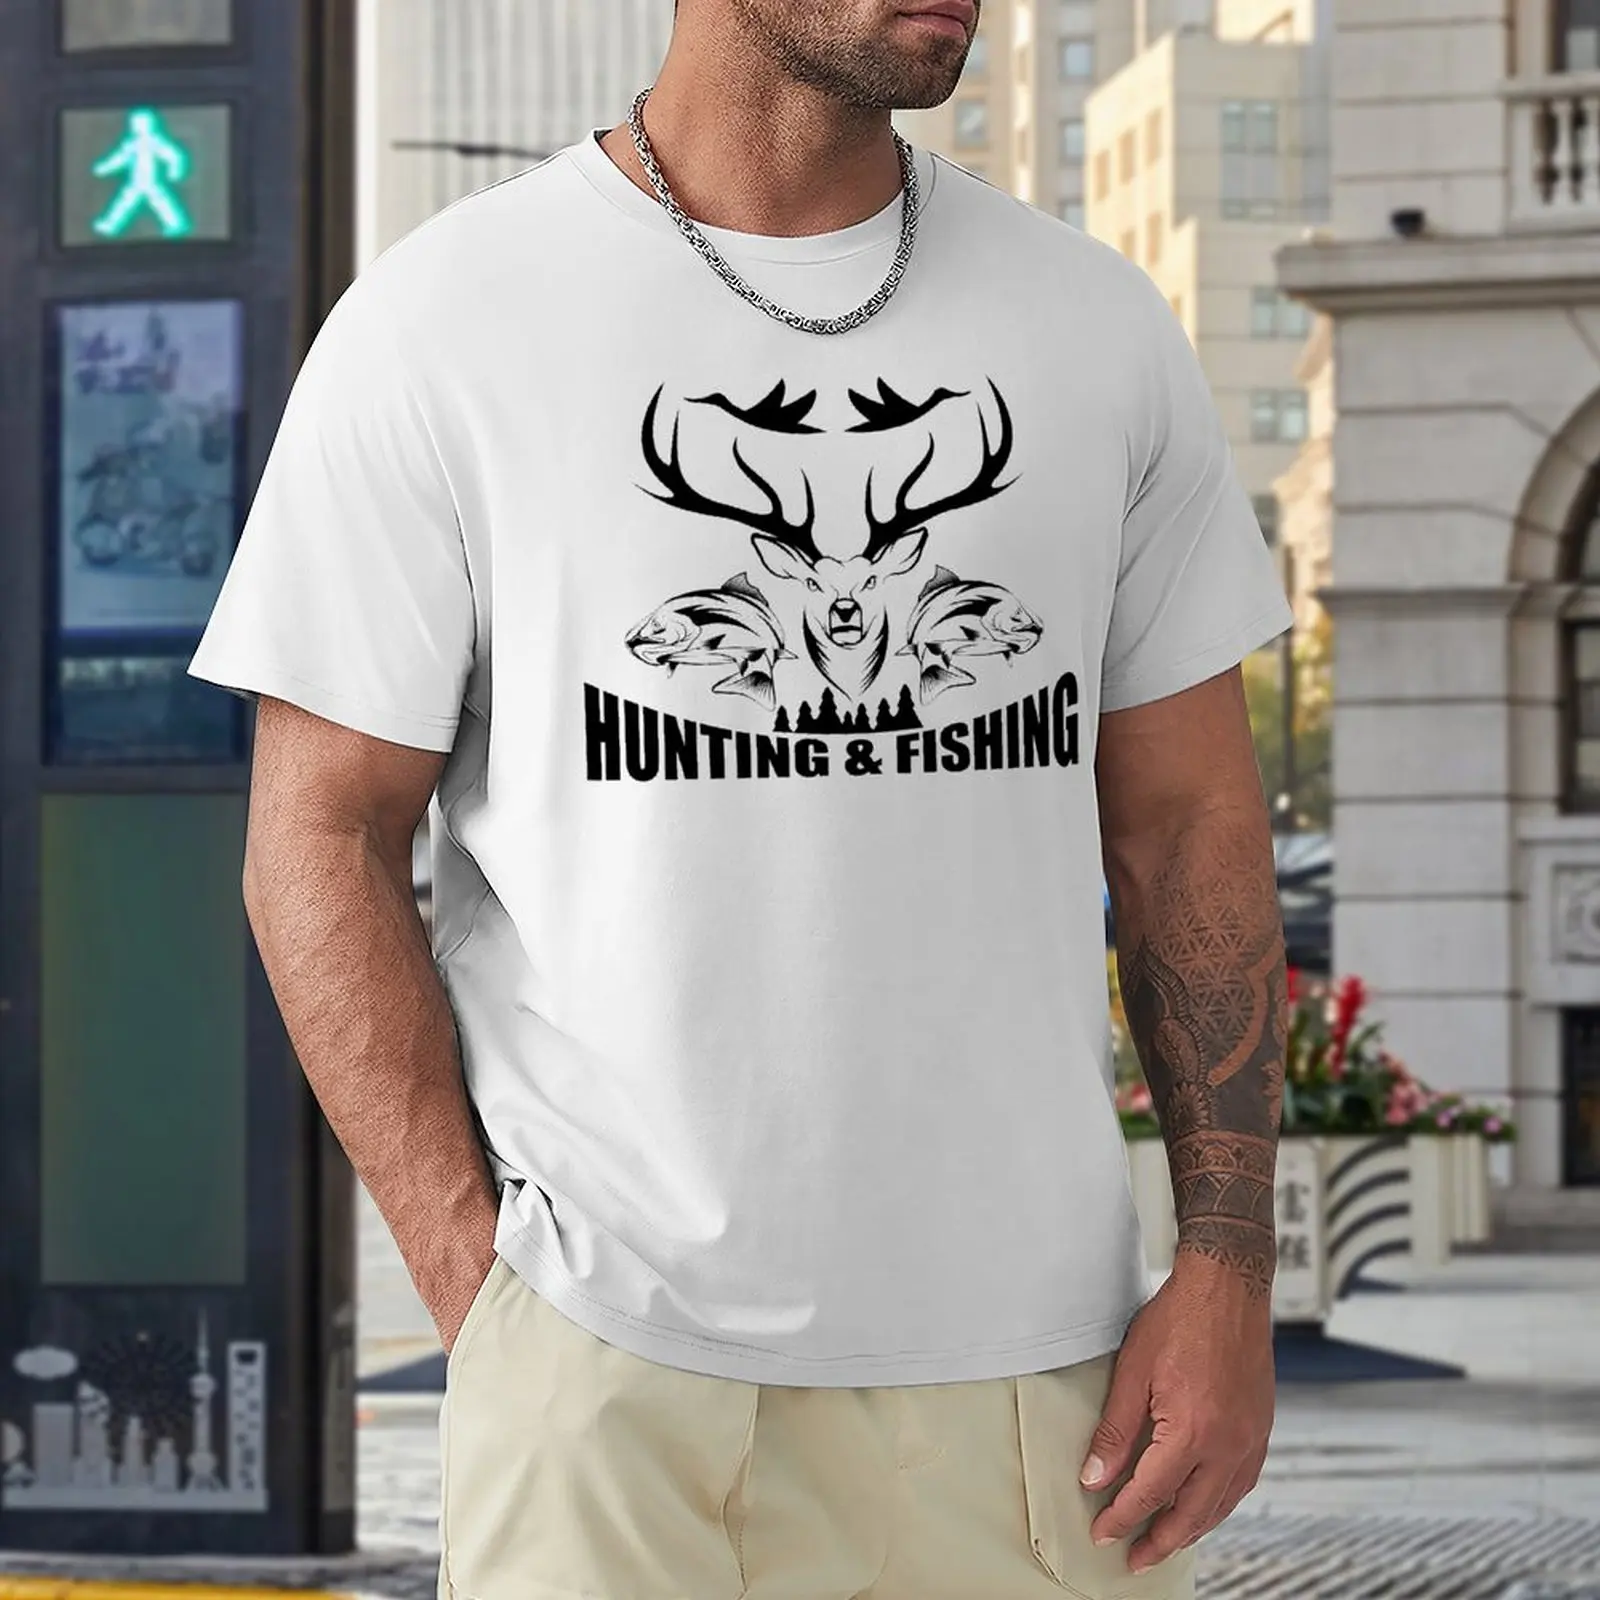 

Hunting And Fishing in Vintage Emblem Design Antler Horns Mallard Pine Tree (5) Cute Tshirt top Quality Activity Competition